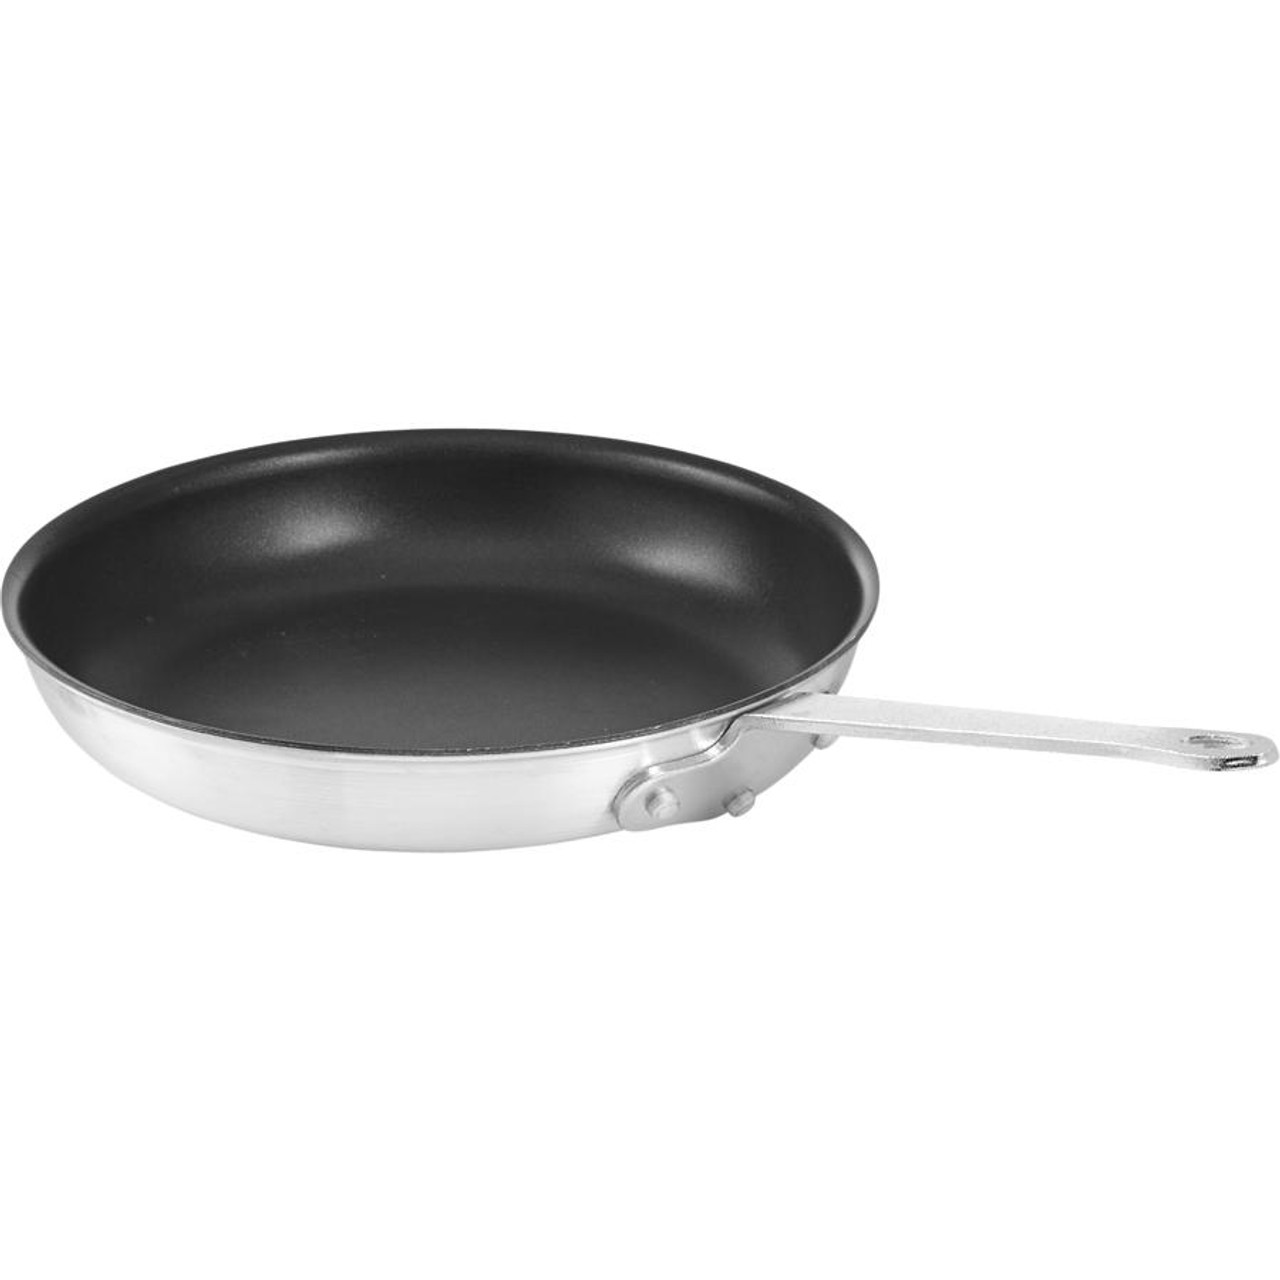 THERMALLOY Non-Stick Fry Pan, 10-Inch - Effortless Cooking and Easy Cleanup 